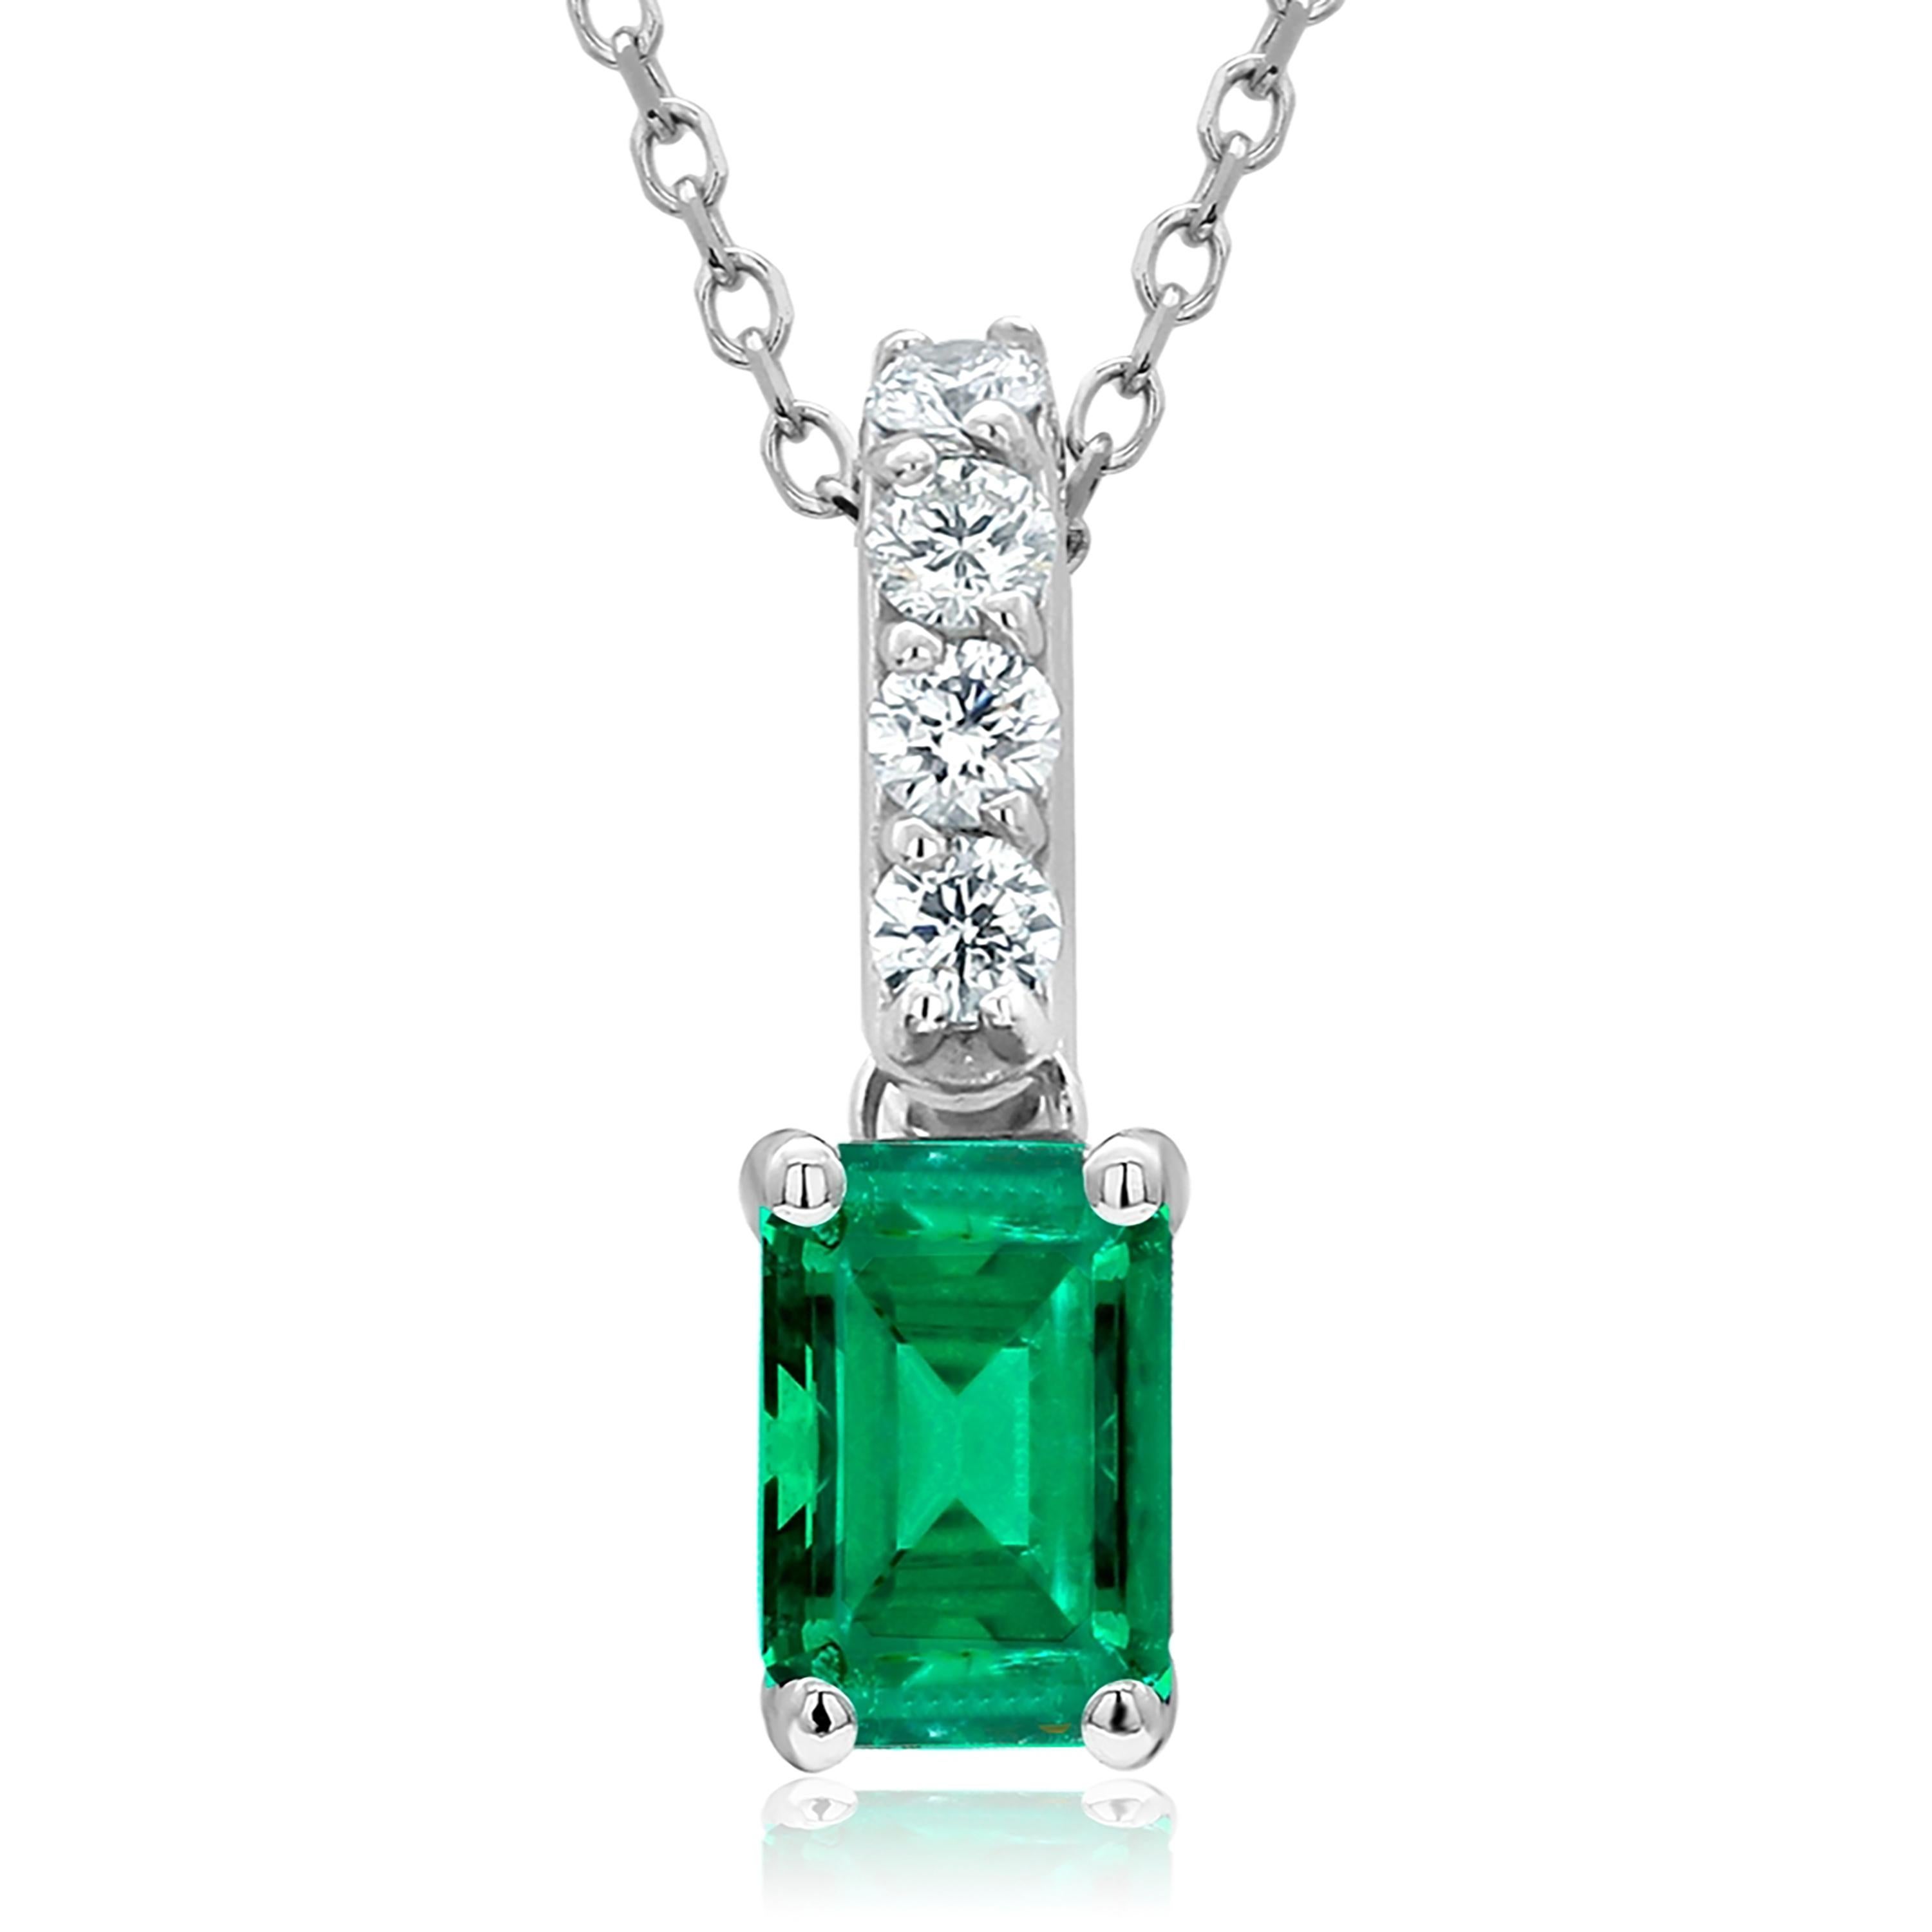 Women's or Men's White Gold Drop Pendant Necklace with Emerald and a Diamond Bail 